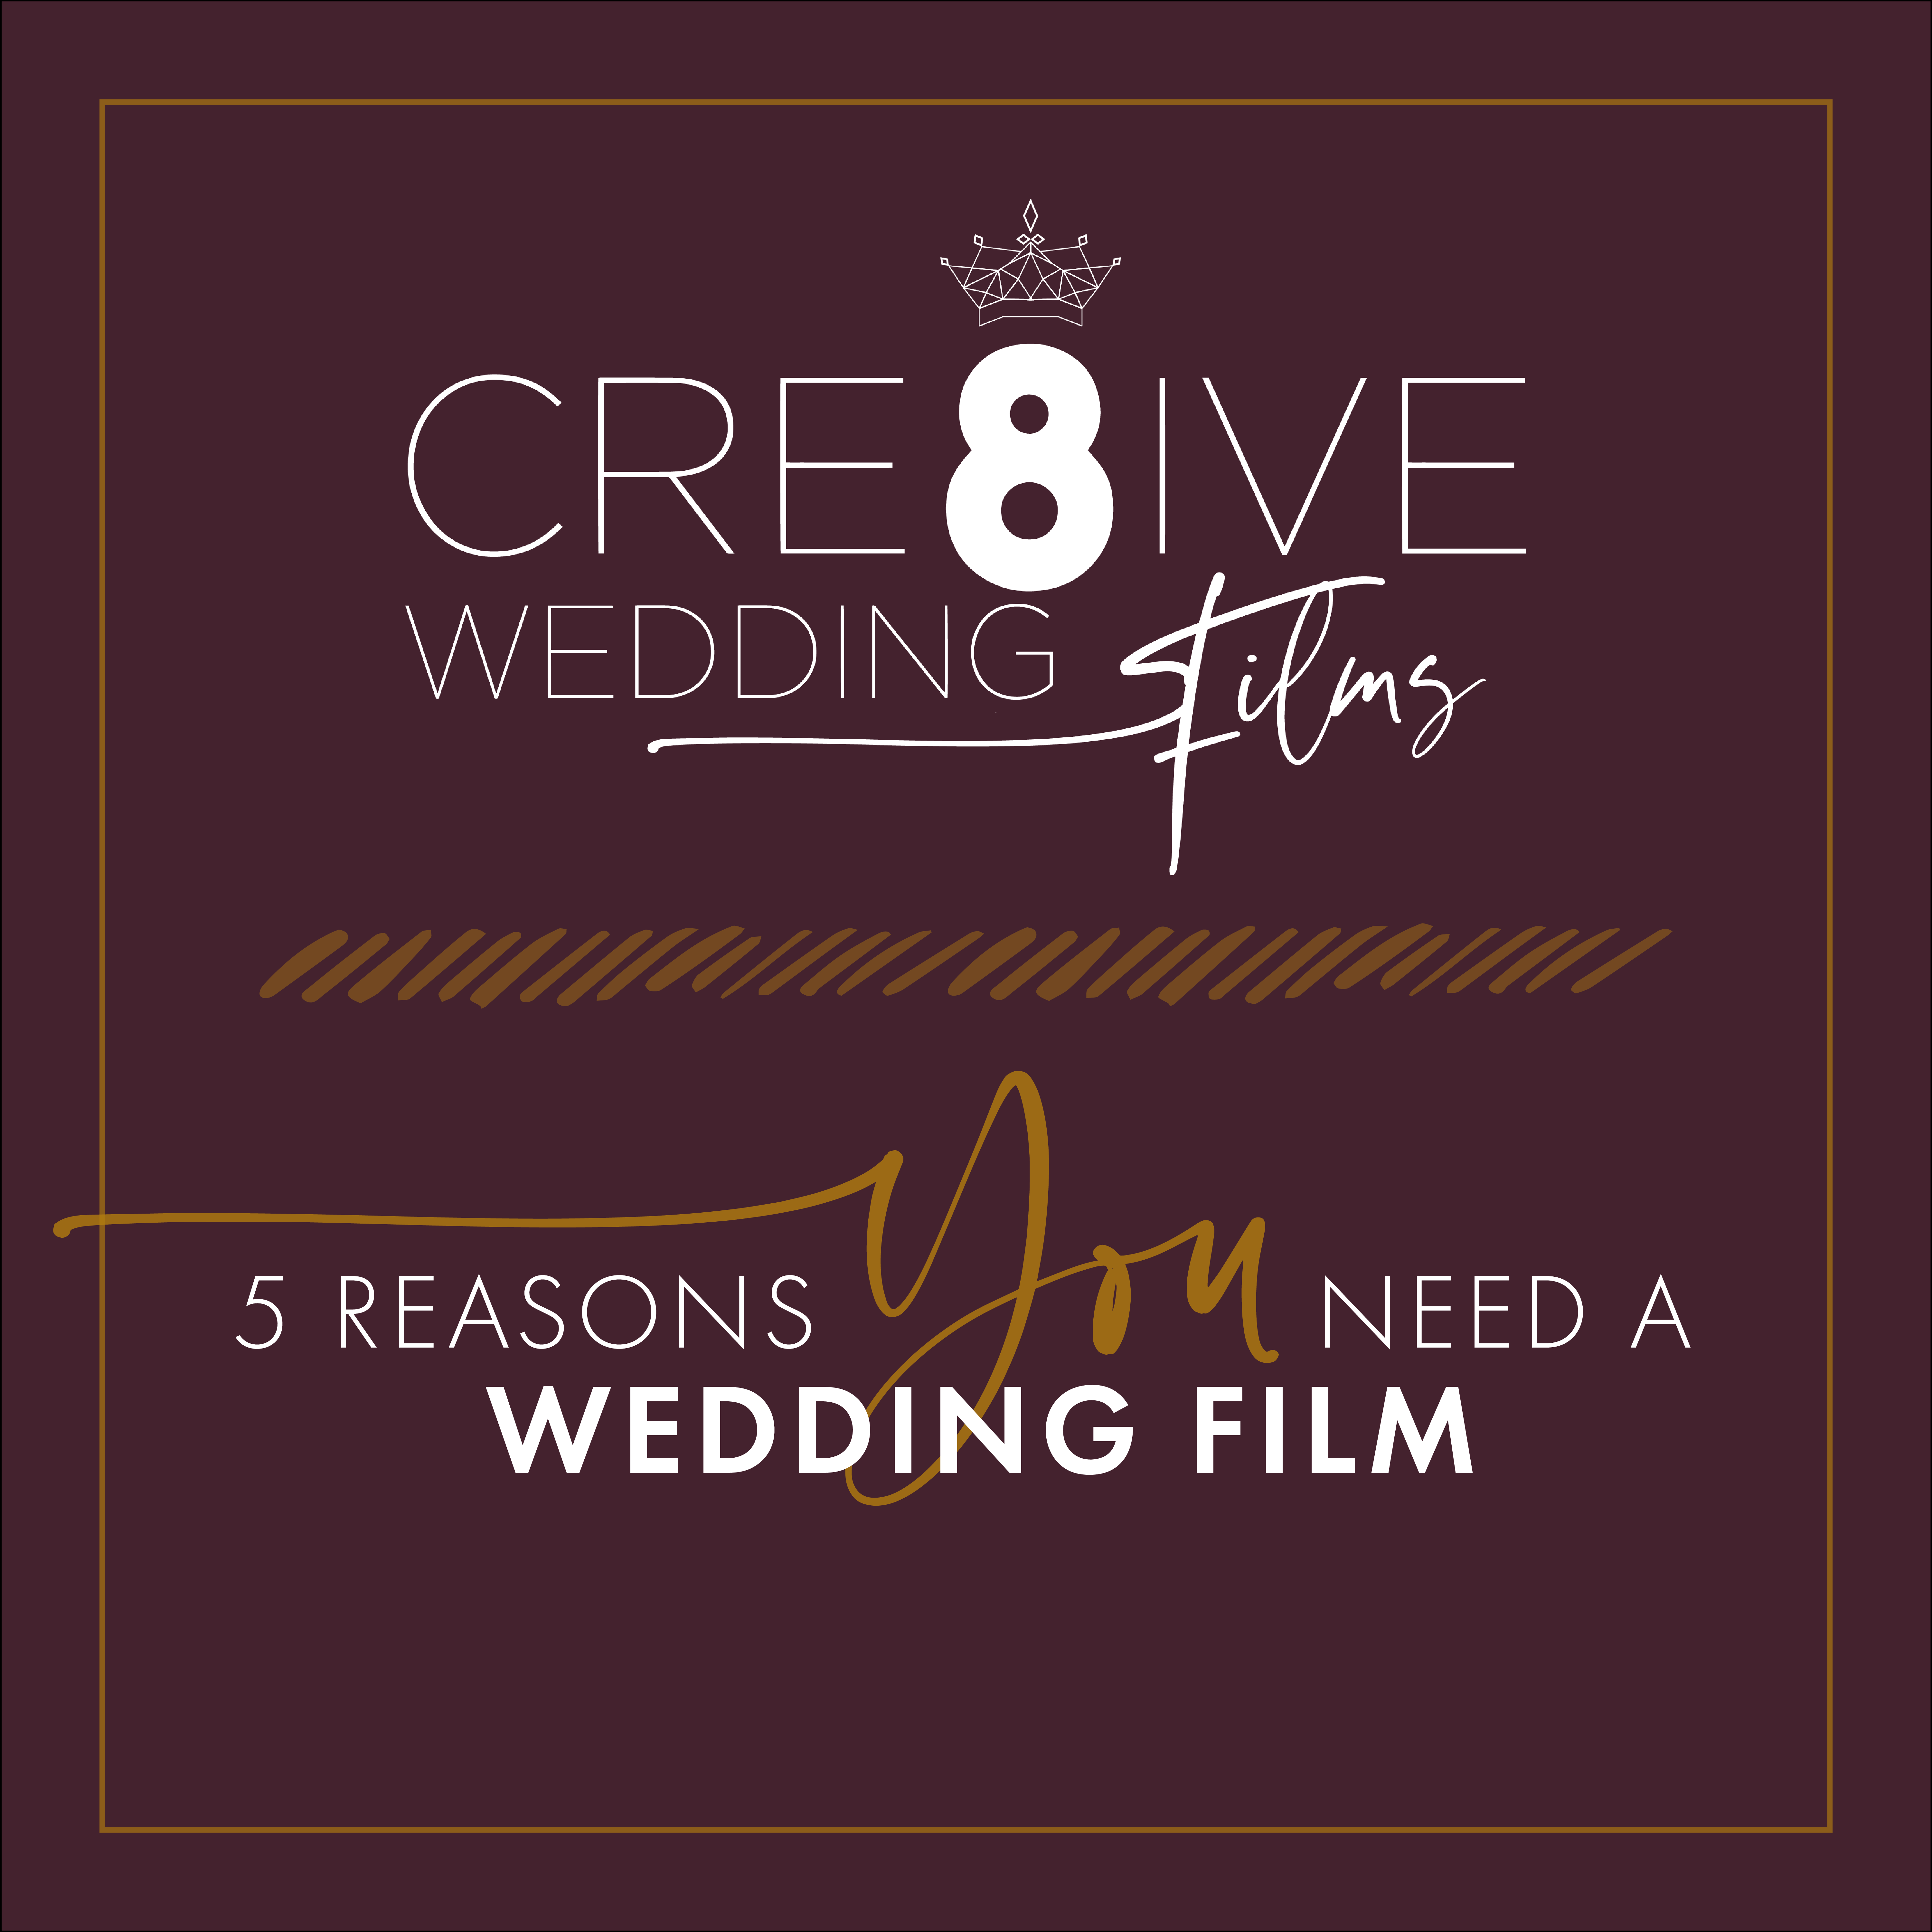 Top 5 Reasons You Need a Wedding Film!??